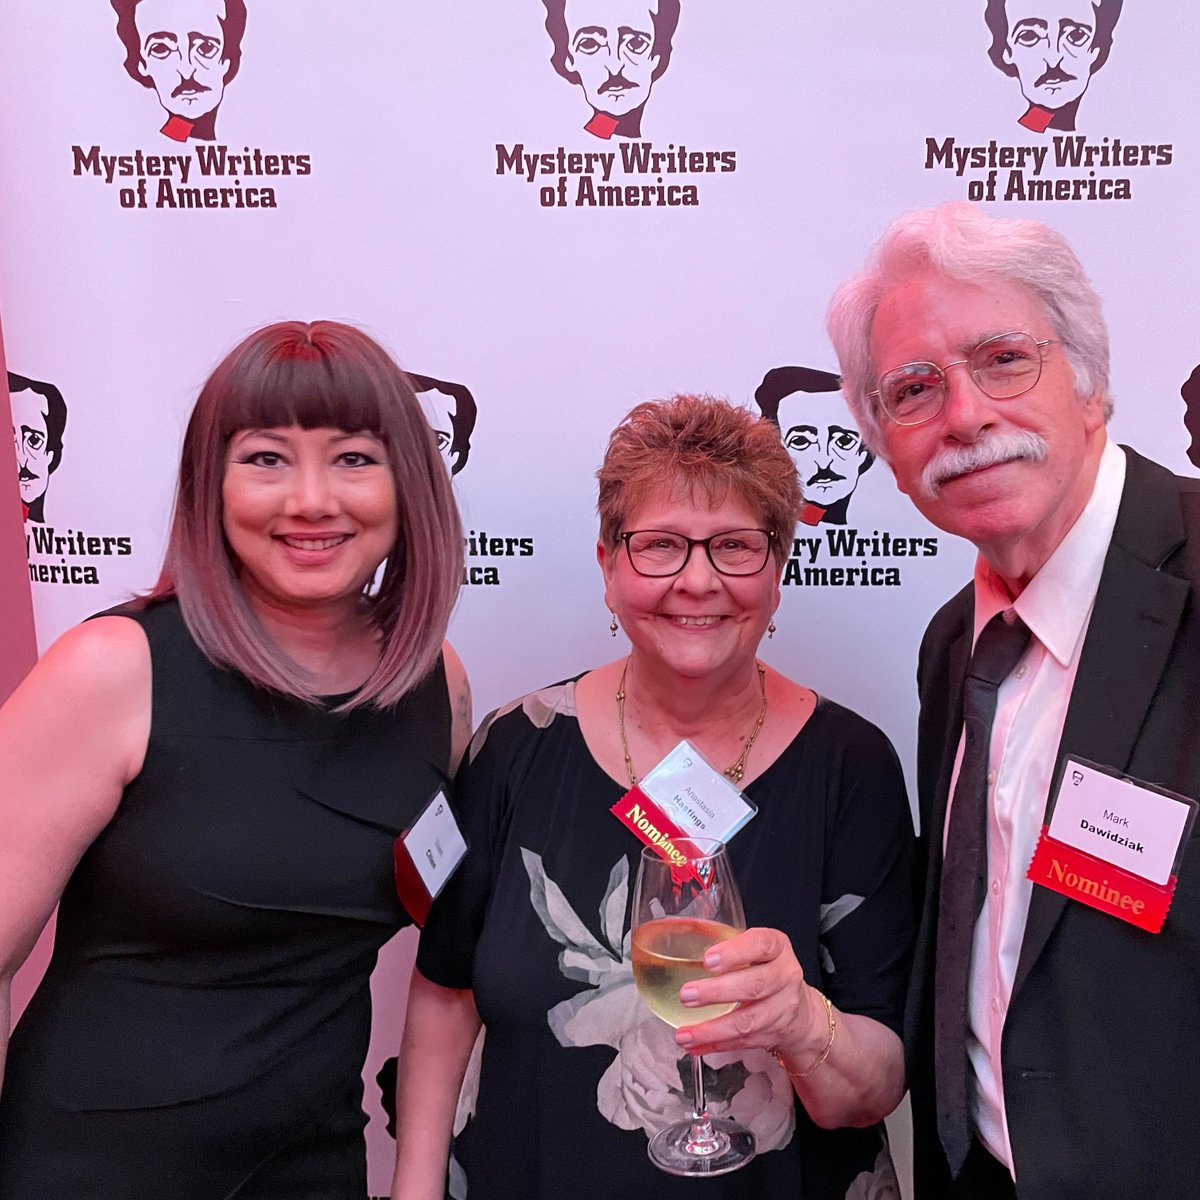 Here's a recap of last Wednesday's Edgar Awards banquet, where authors dined, confabbed, posed, and looked amazing. It was a grand occasion hosted by a great community, and we'll see many of you again at Thrillerfest!